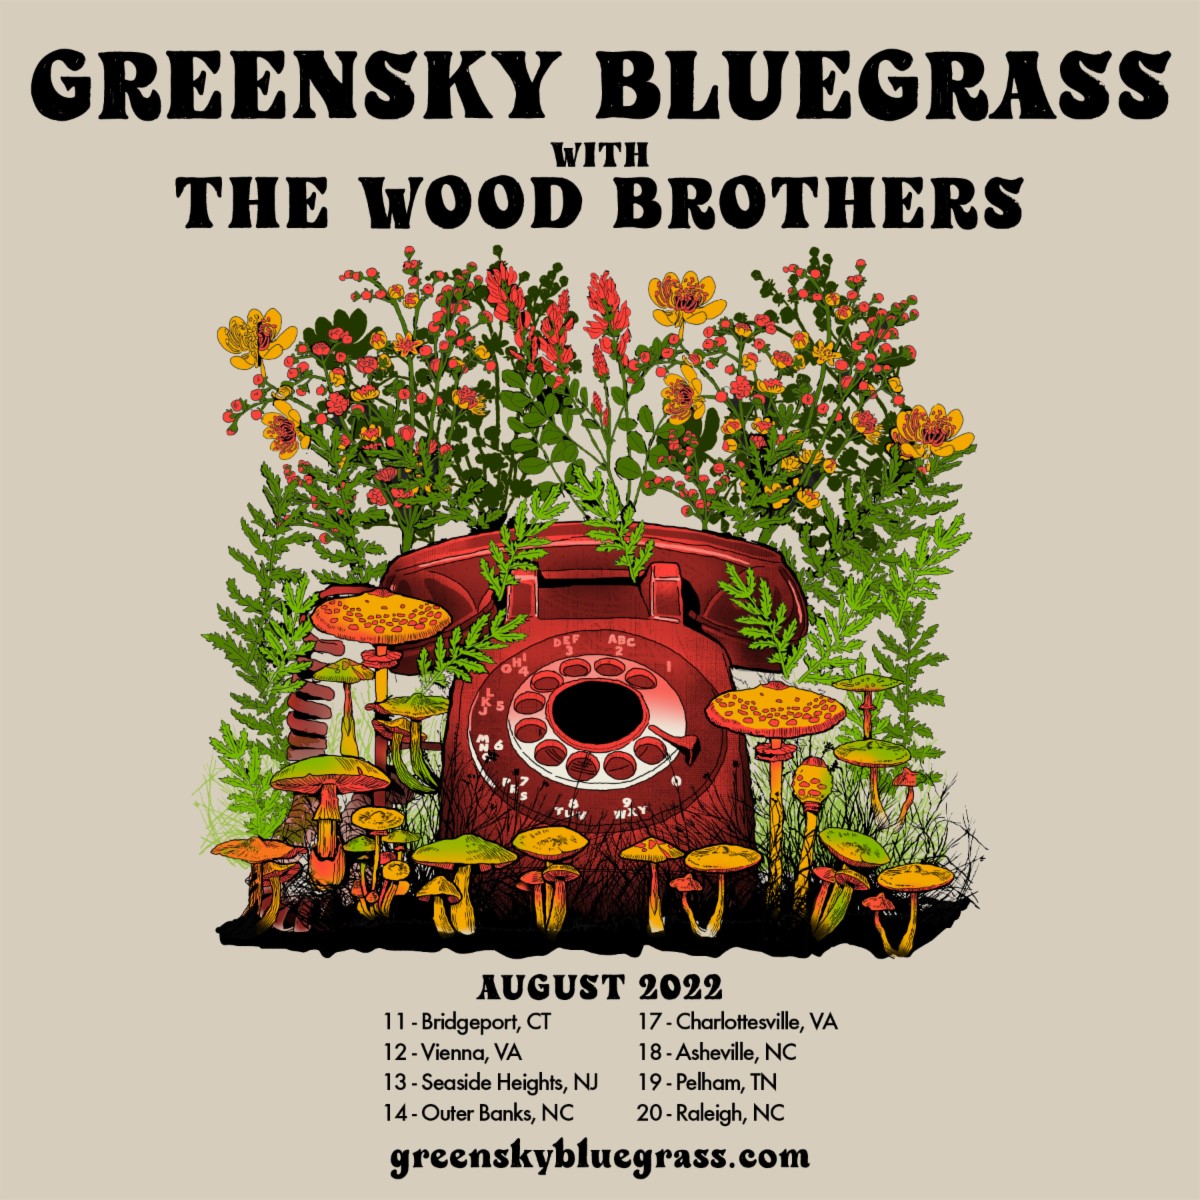 Greensky Bluegrass announces intimate amphitheater run this summer with The Wood Brothers